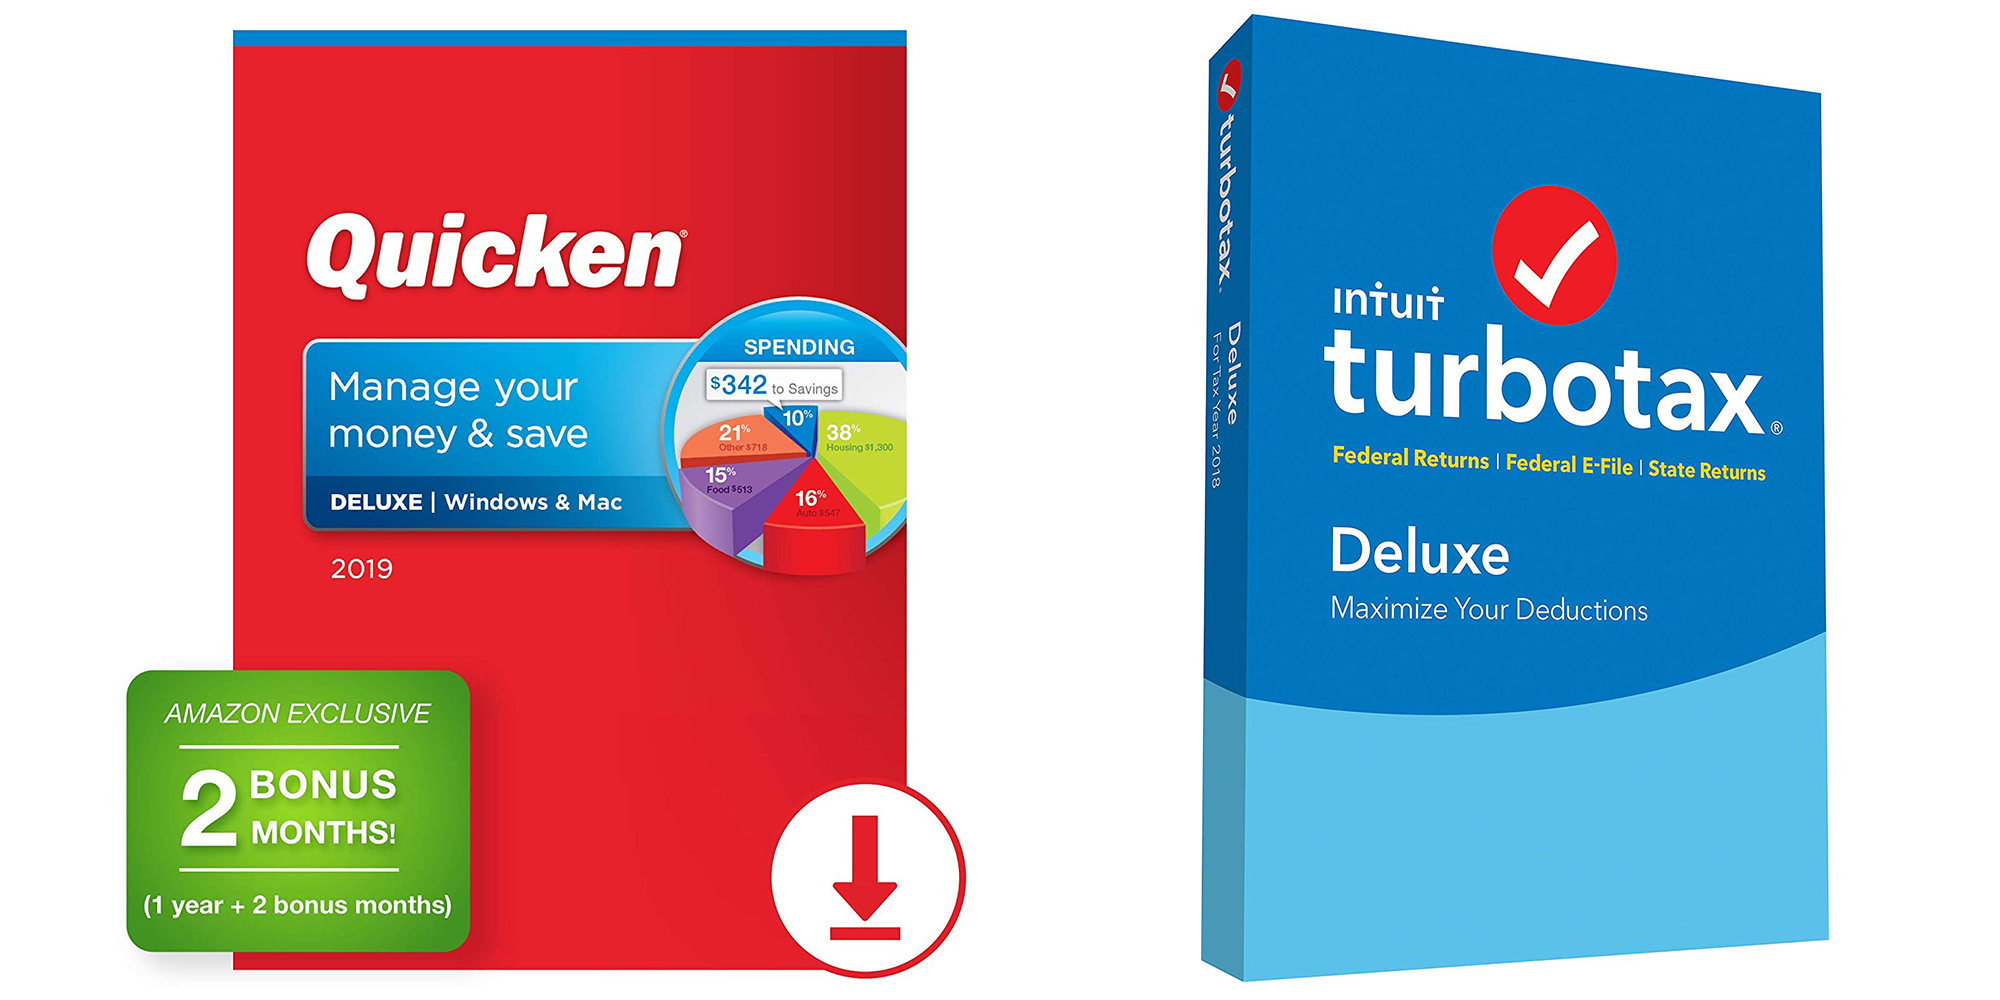 Shore up your financials w/ TurboTax Deluxe and Quicken software for